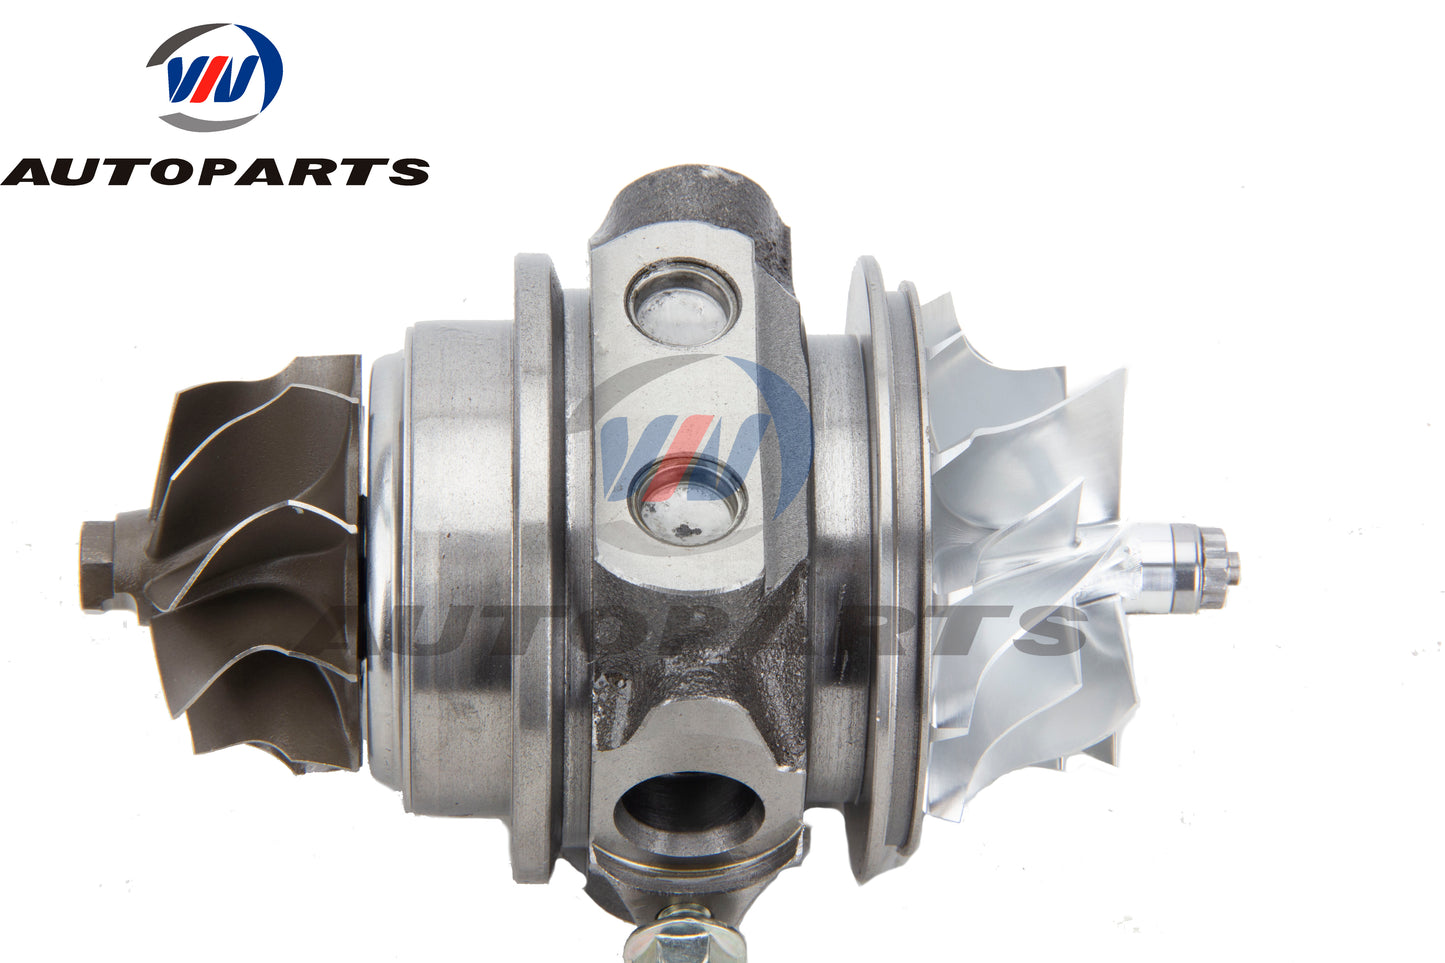 Turbo cartridge chra for BMW 135i 335i 535i Z4 X6 740I 3.0l N54B30 SIZE ENLARGED FOR 17T&19T